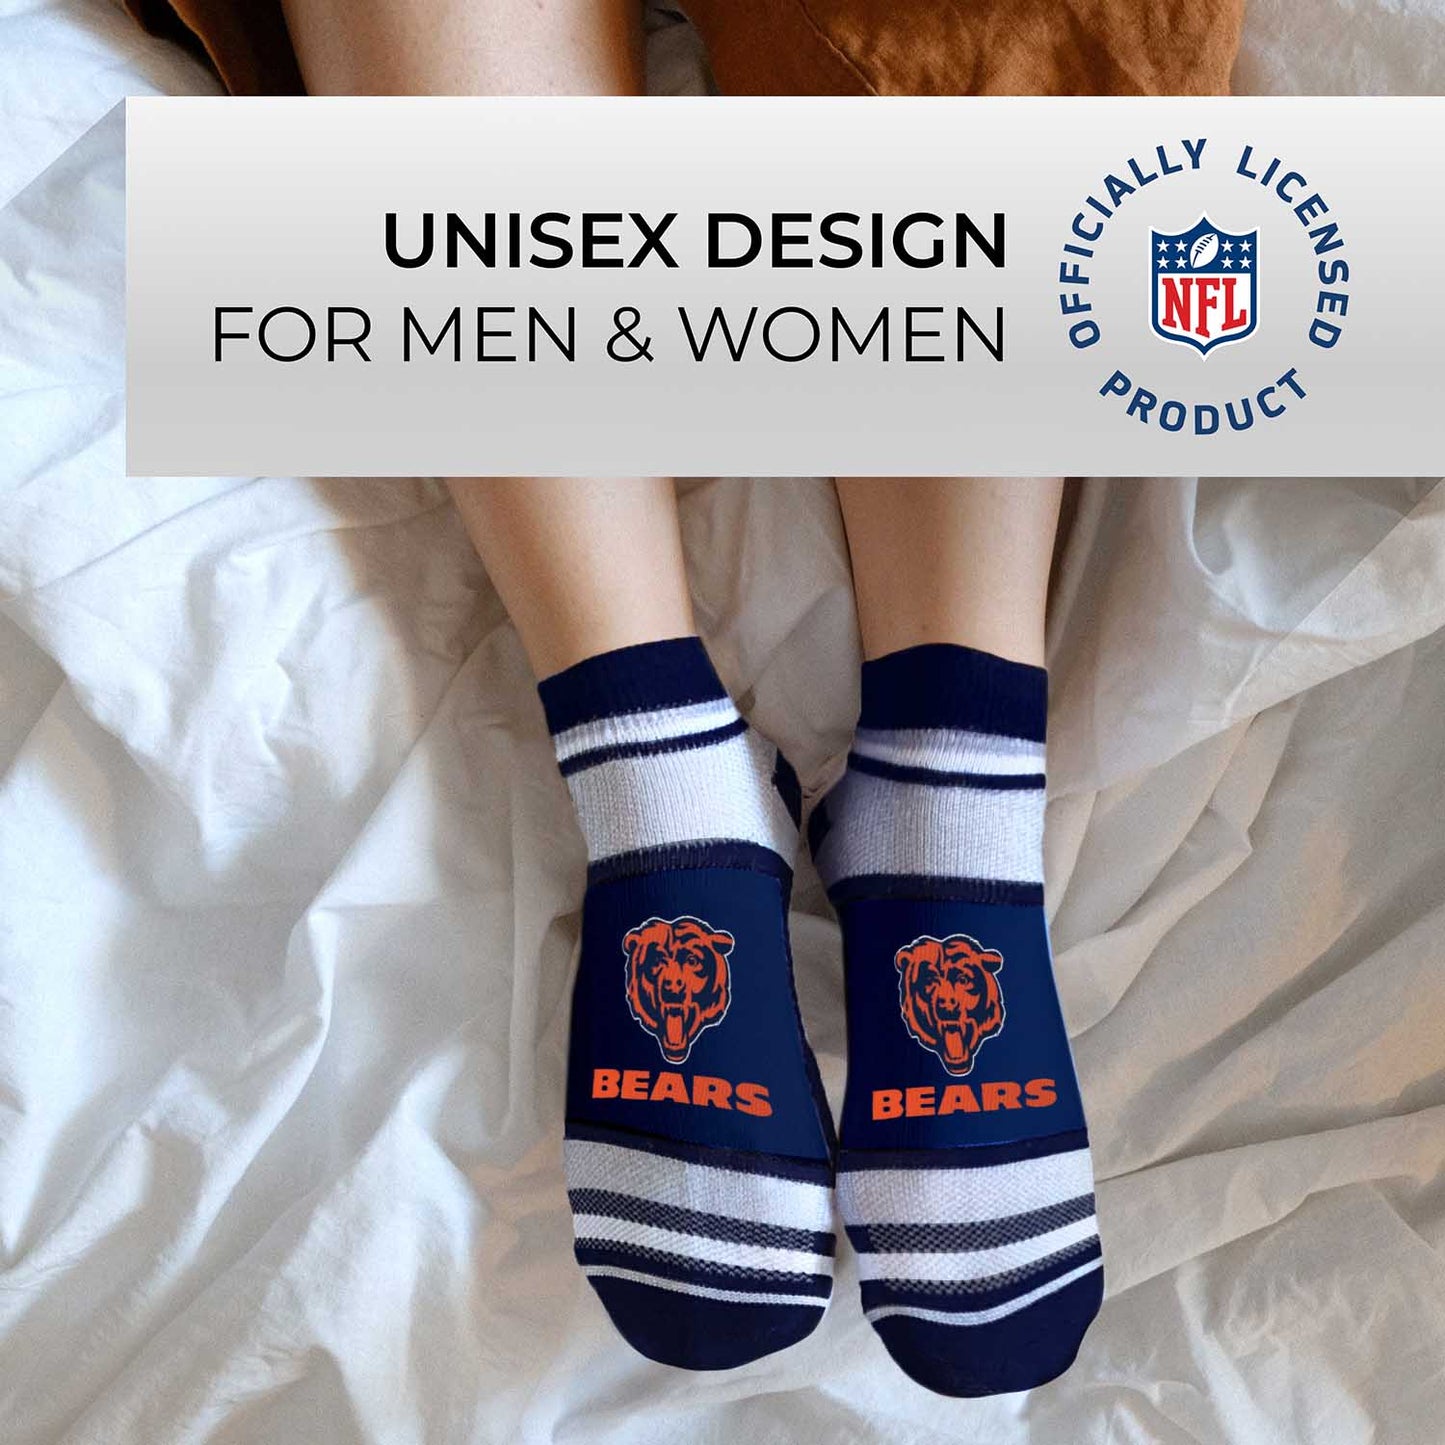 Chicago Bears NFL Adult Marquis Addition No Show Socks - Navy